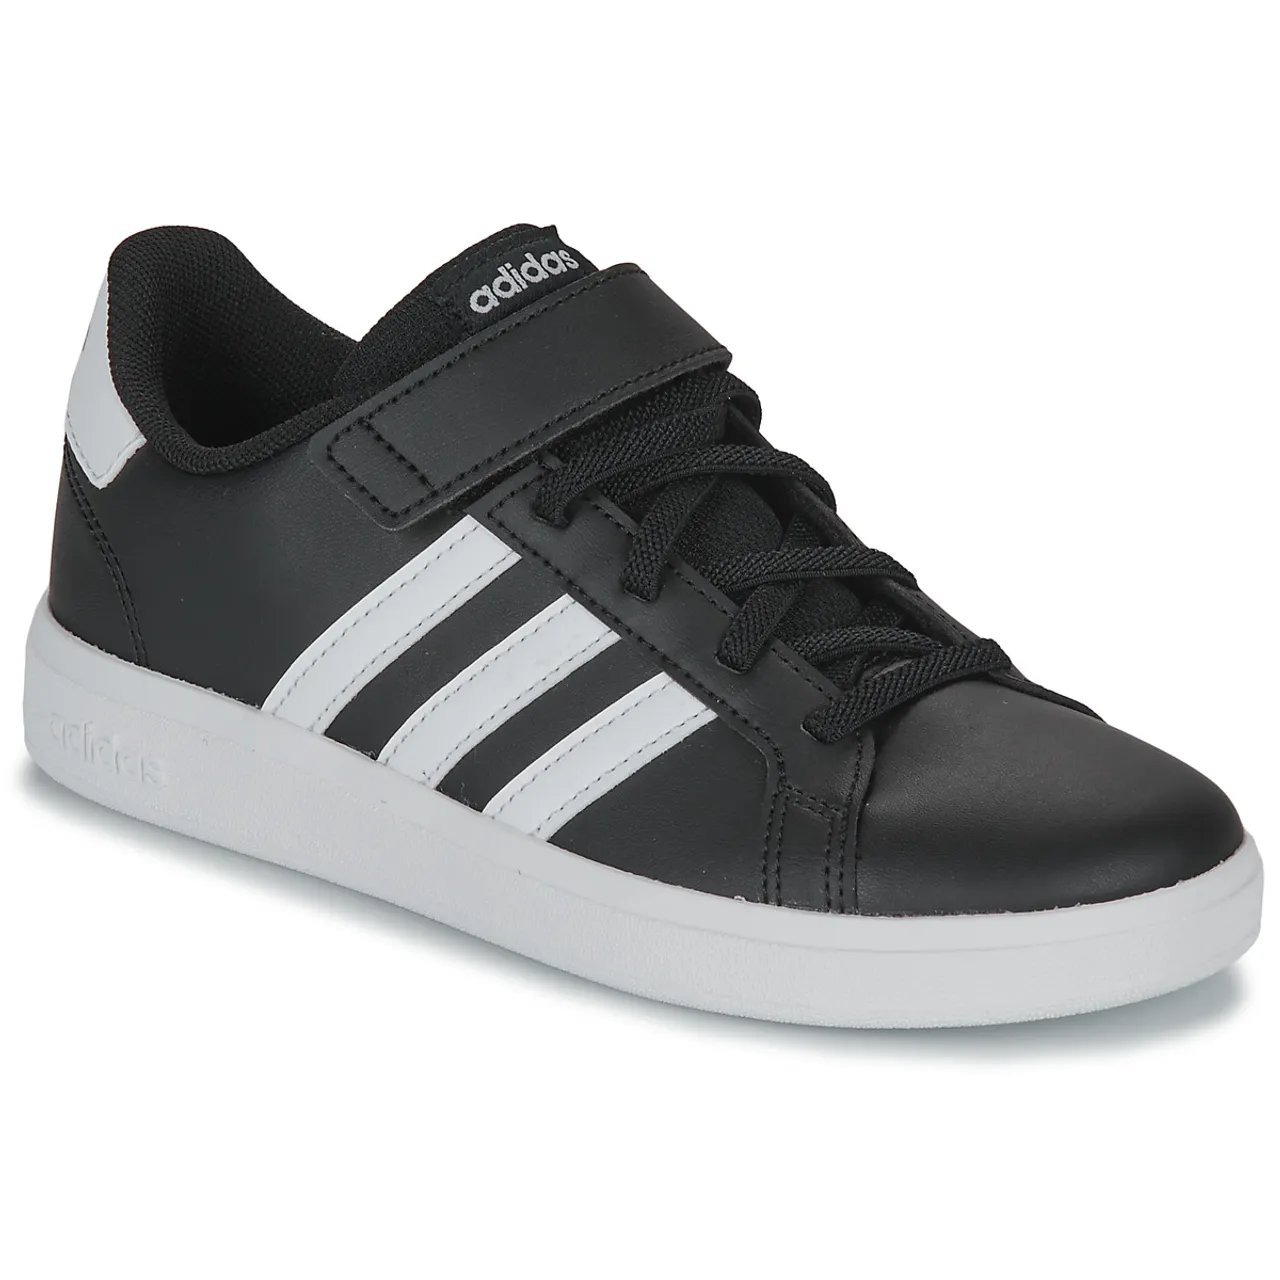 adidas  GRAND COURT 2.0 EL  boys's Children's Shoes (Trainers) in Black